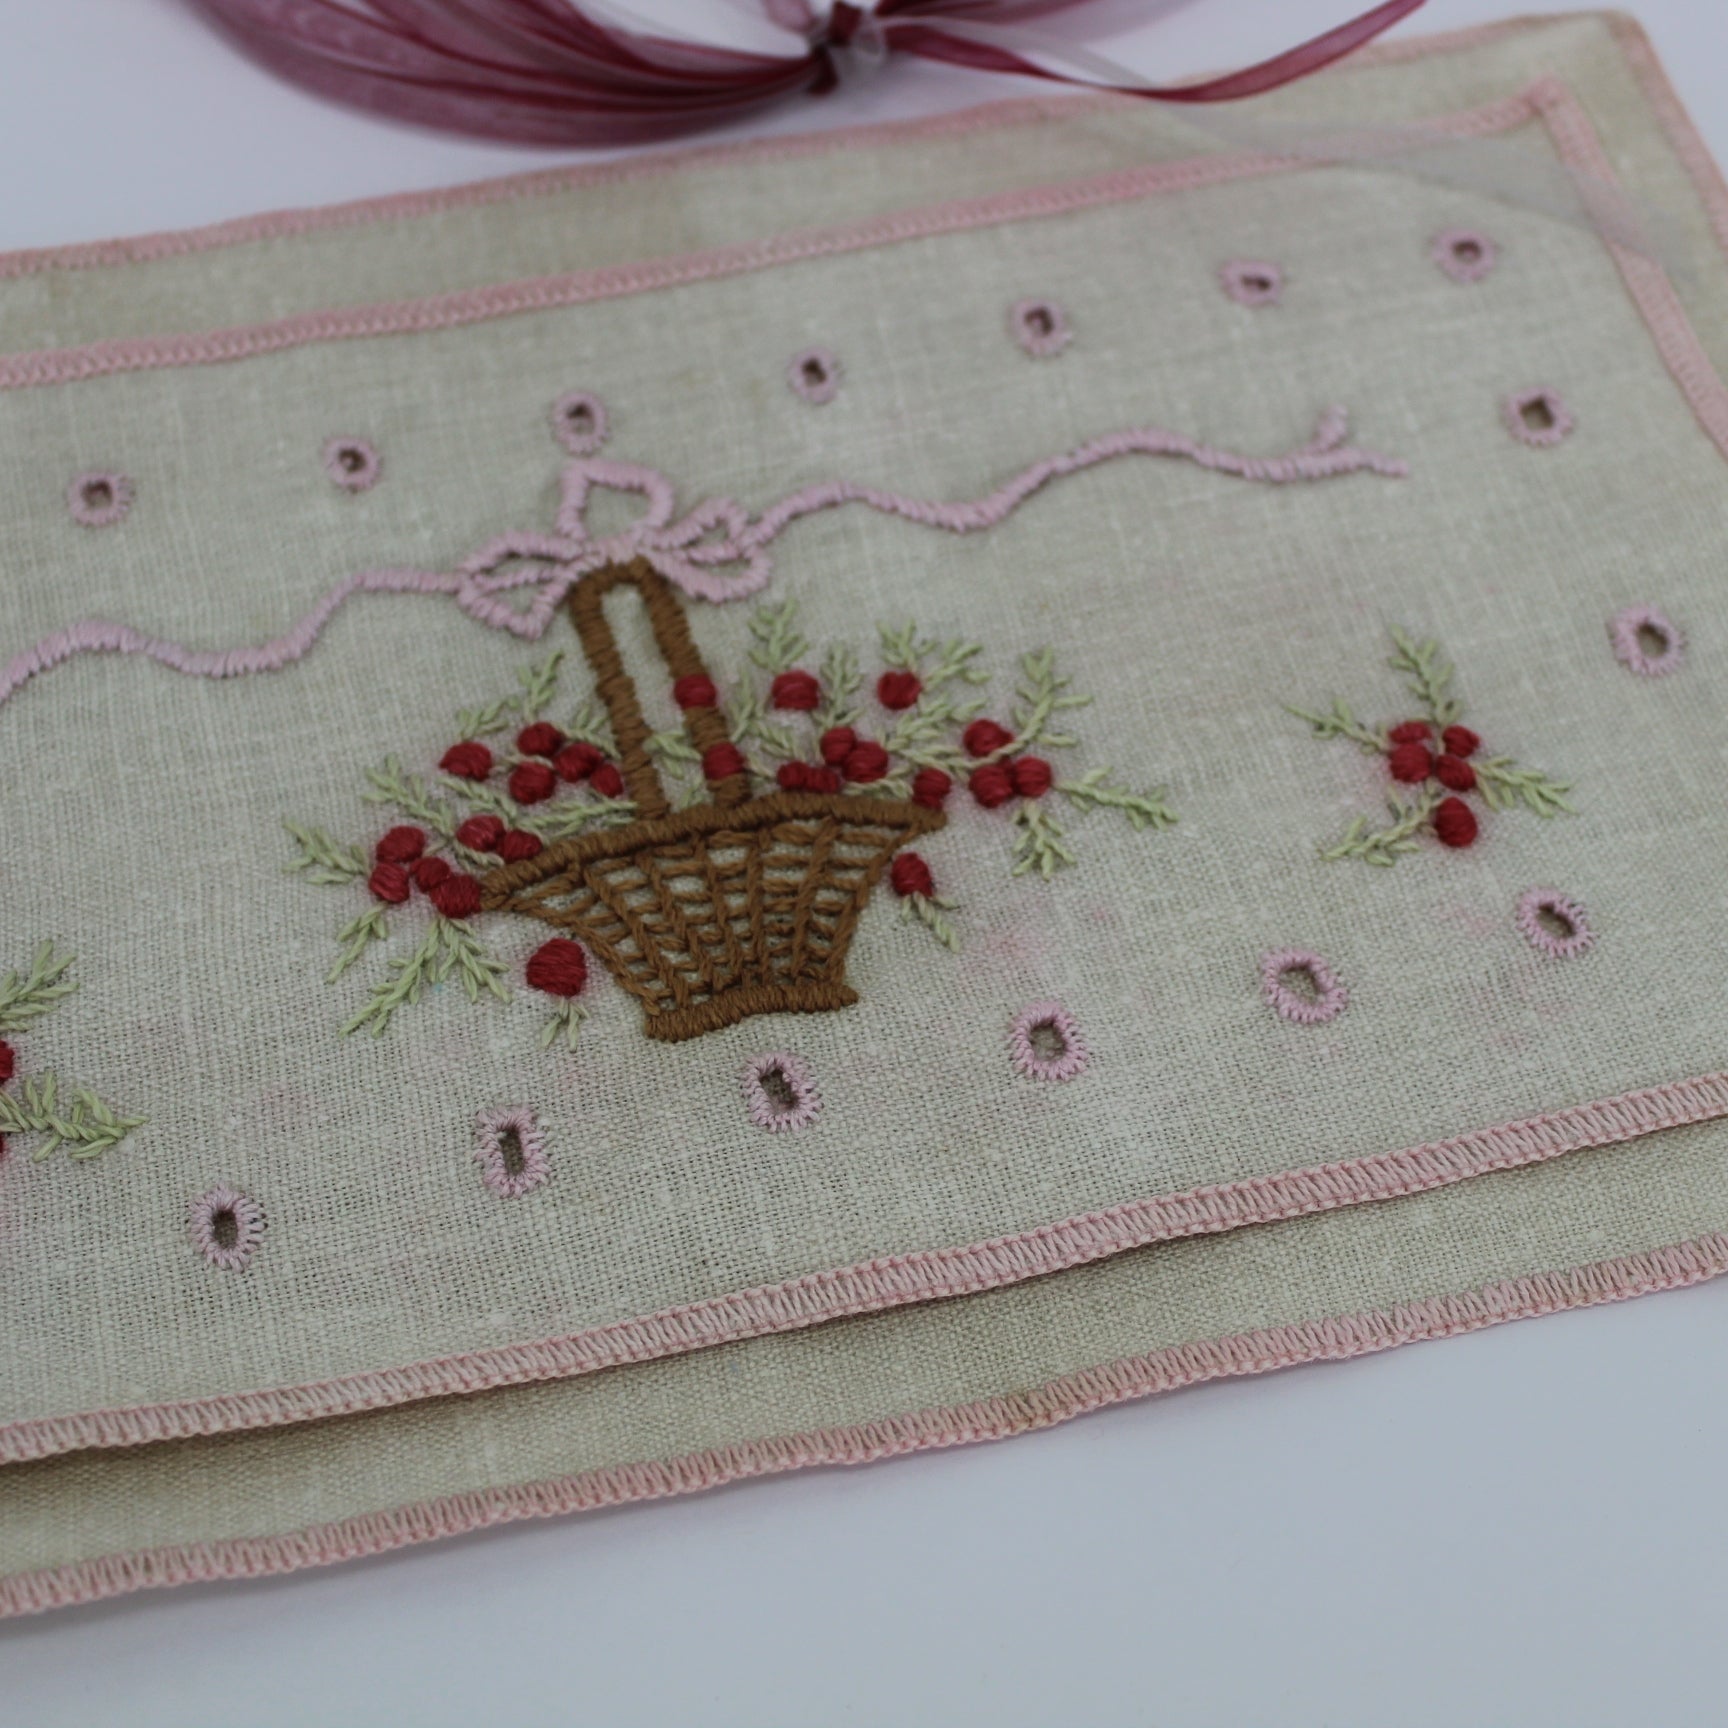 Small Intricately Embroidered Pillow Case Pin Cushion Sachet closeup view of design